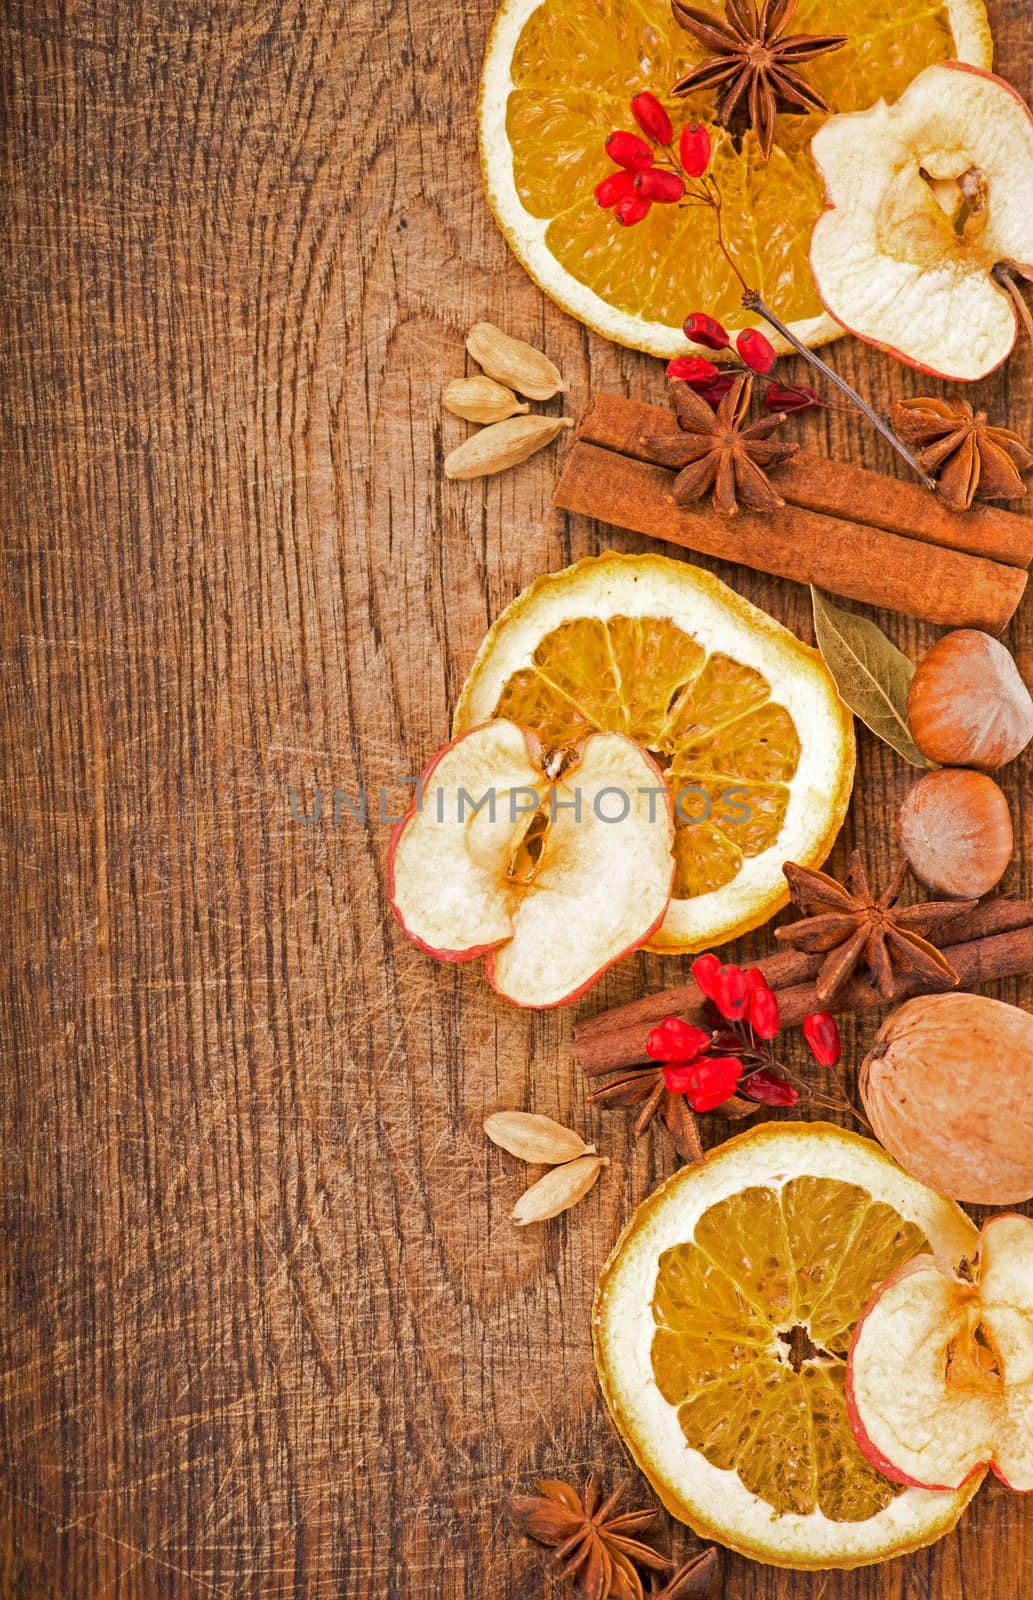 Christmas frame. Spices and dried orange sliceson on a wooden table by aprilphoto